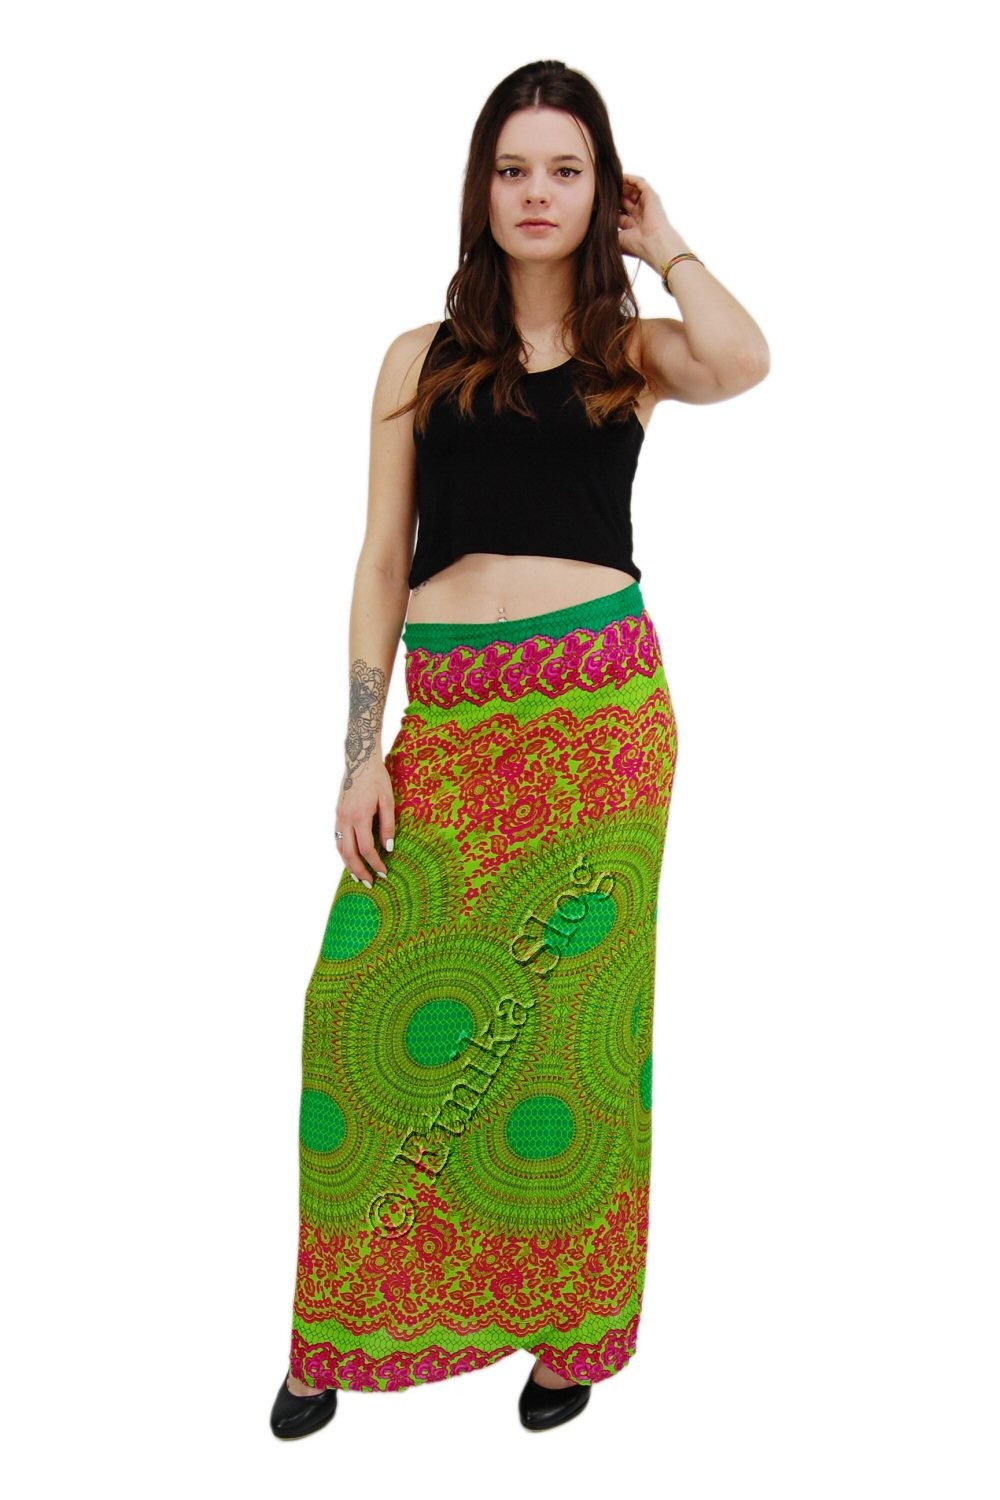 Etnika spring summer collection Crop top for women African print colorful crop top